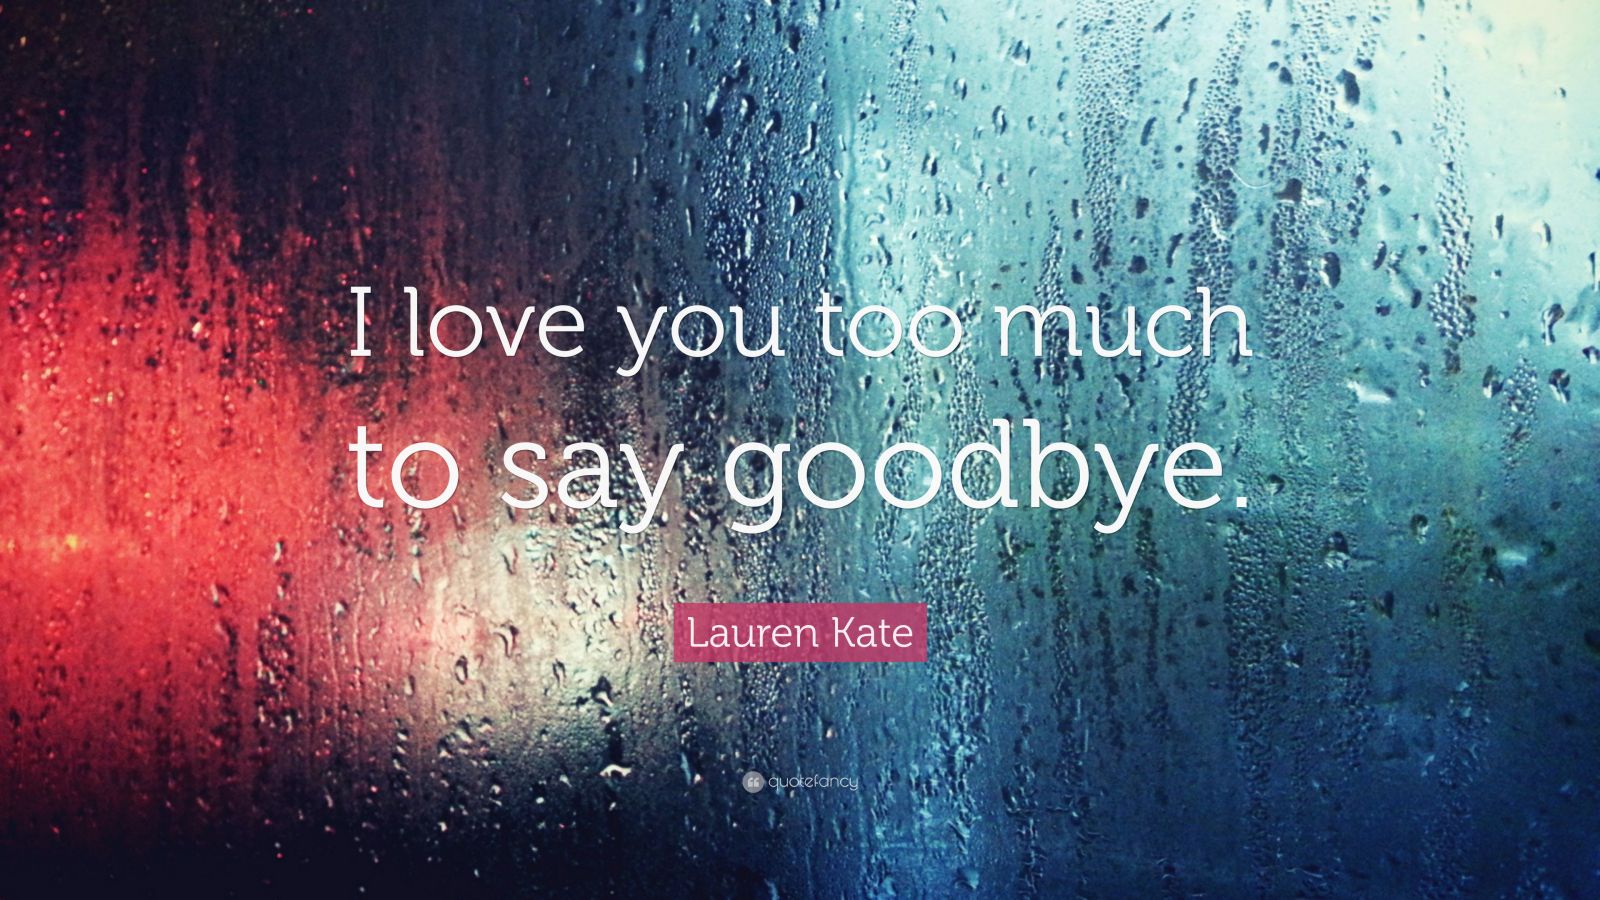 Lauren Kate Quote: “I love you too much to say goodbye.” (9 wallpapers